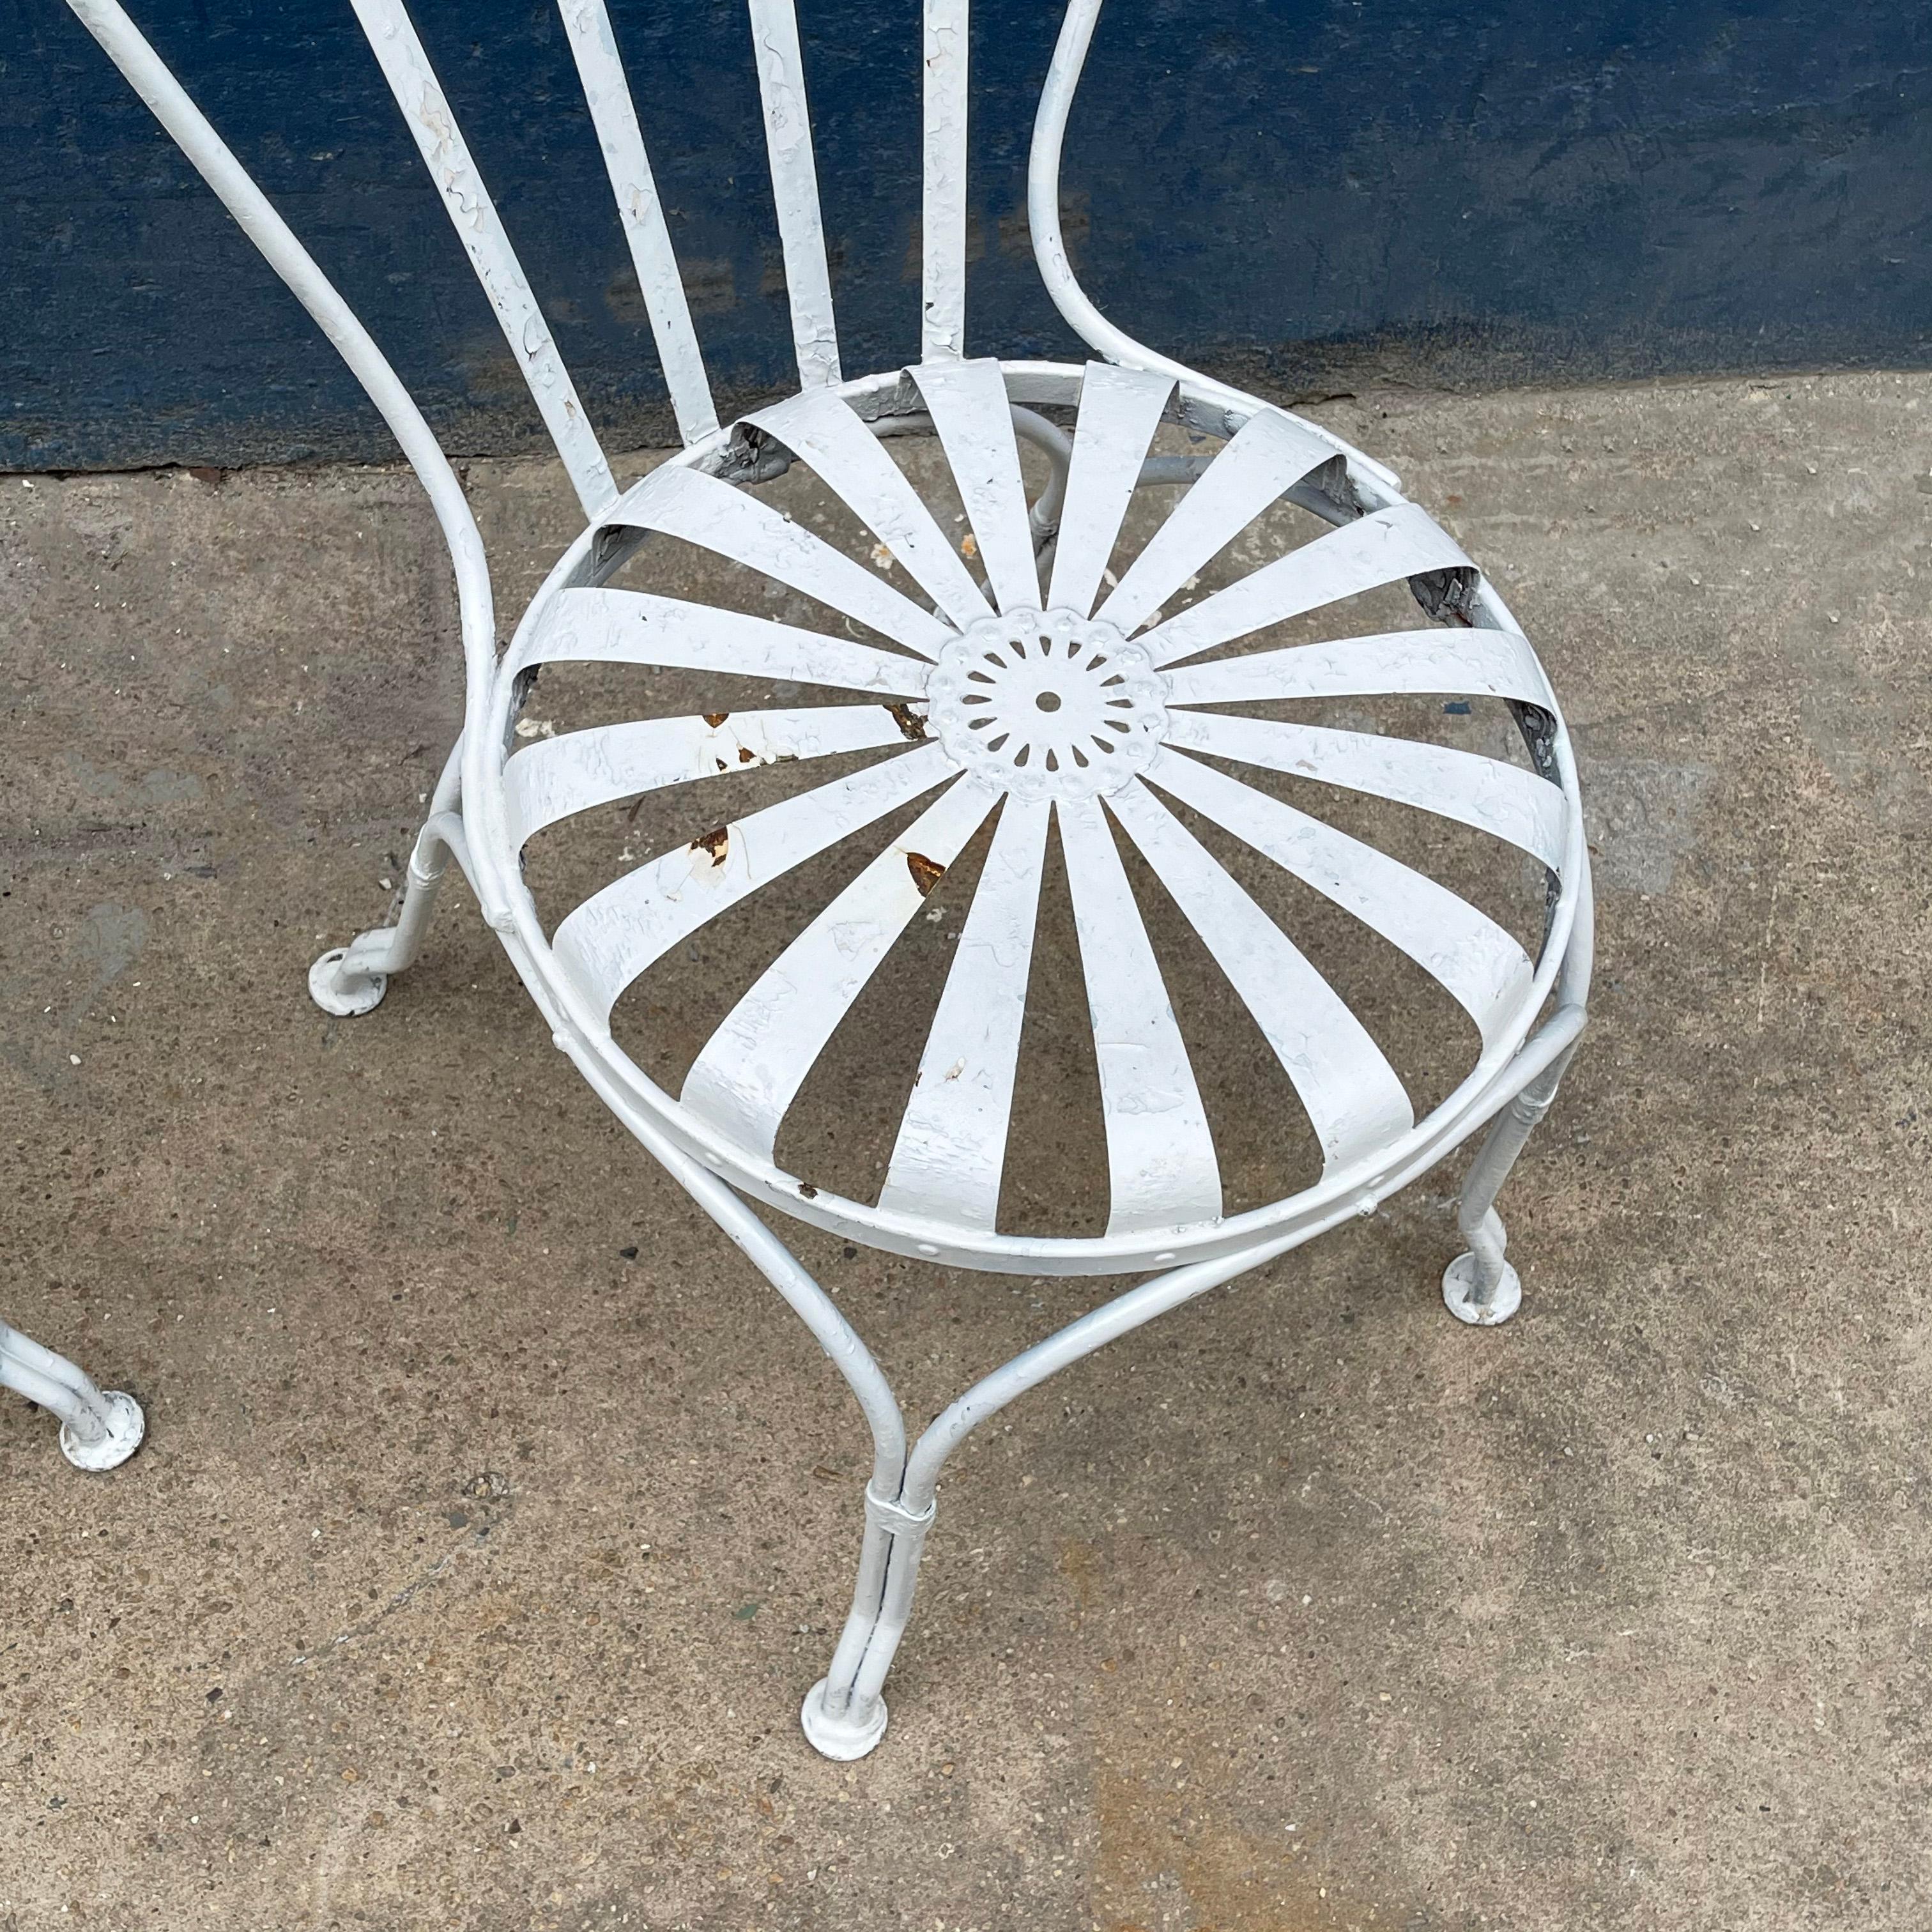 Art Deco Sunburst Garden Chairs by Francois Carré In Good Condition For Sale In Brooklyn, NY